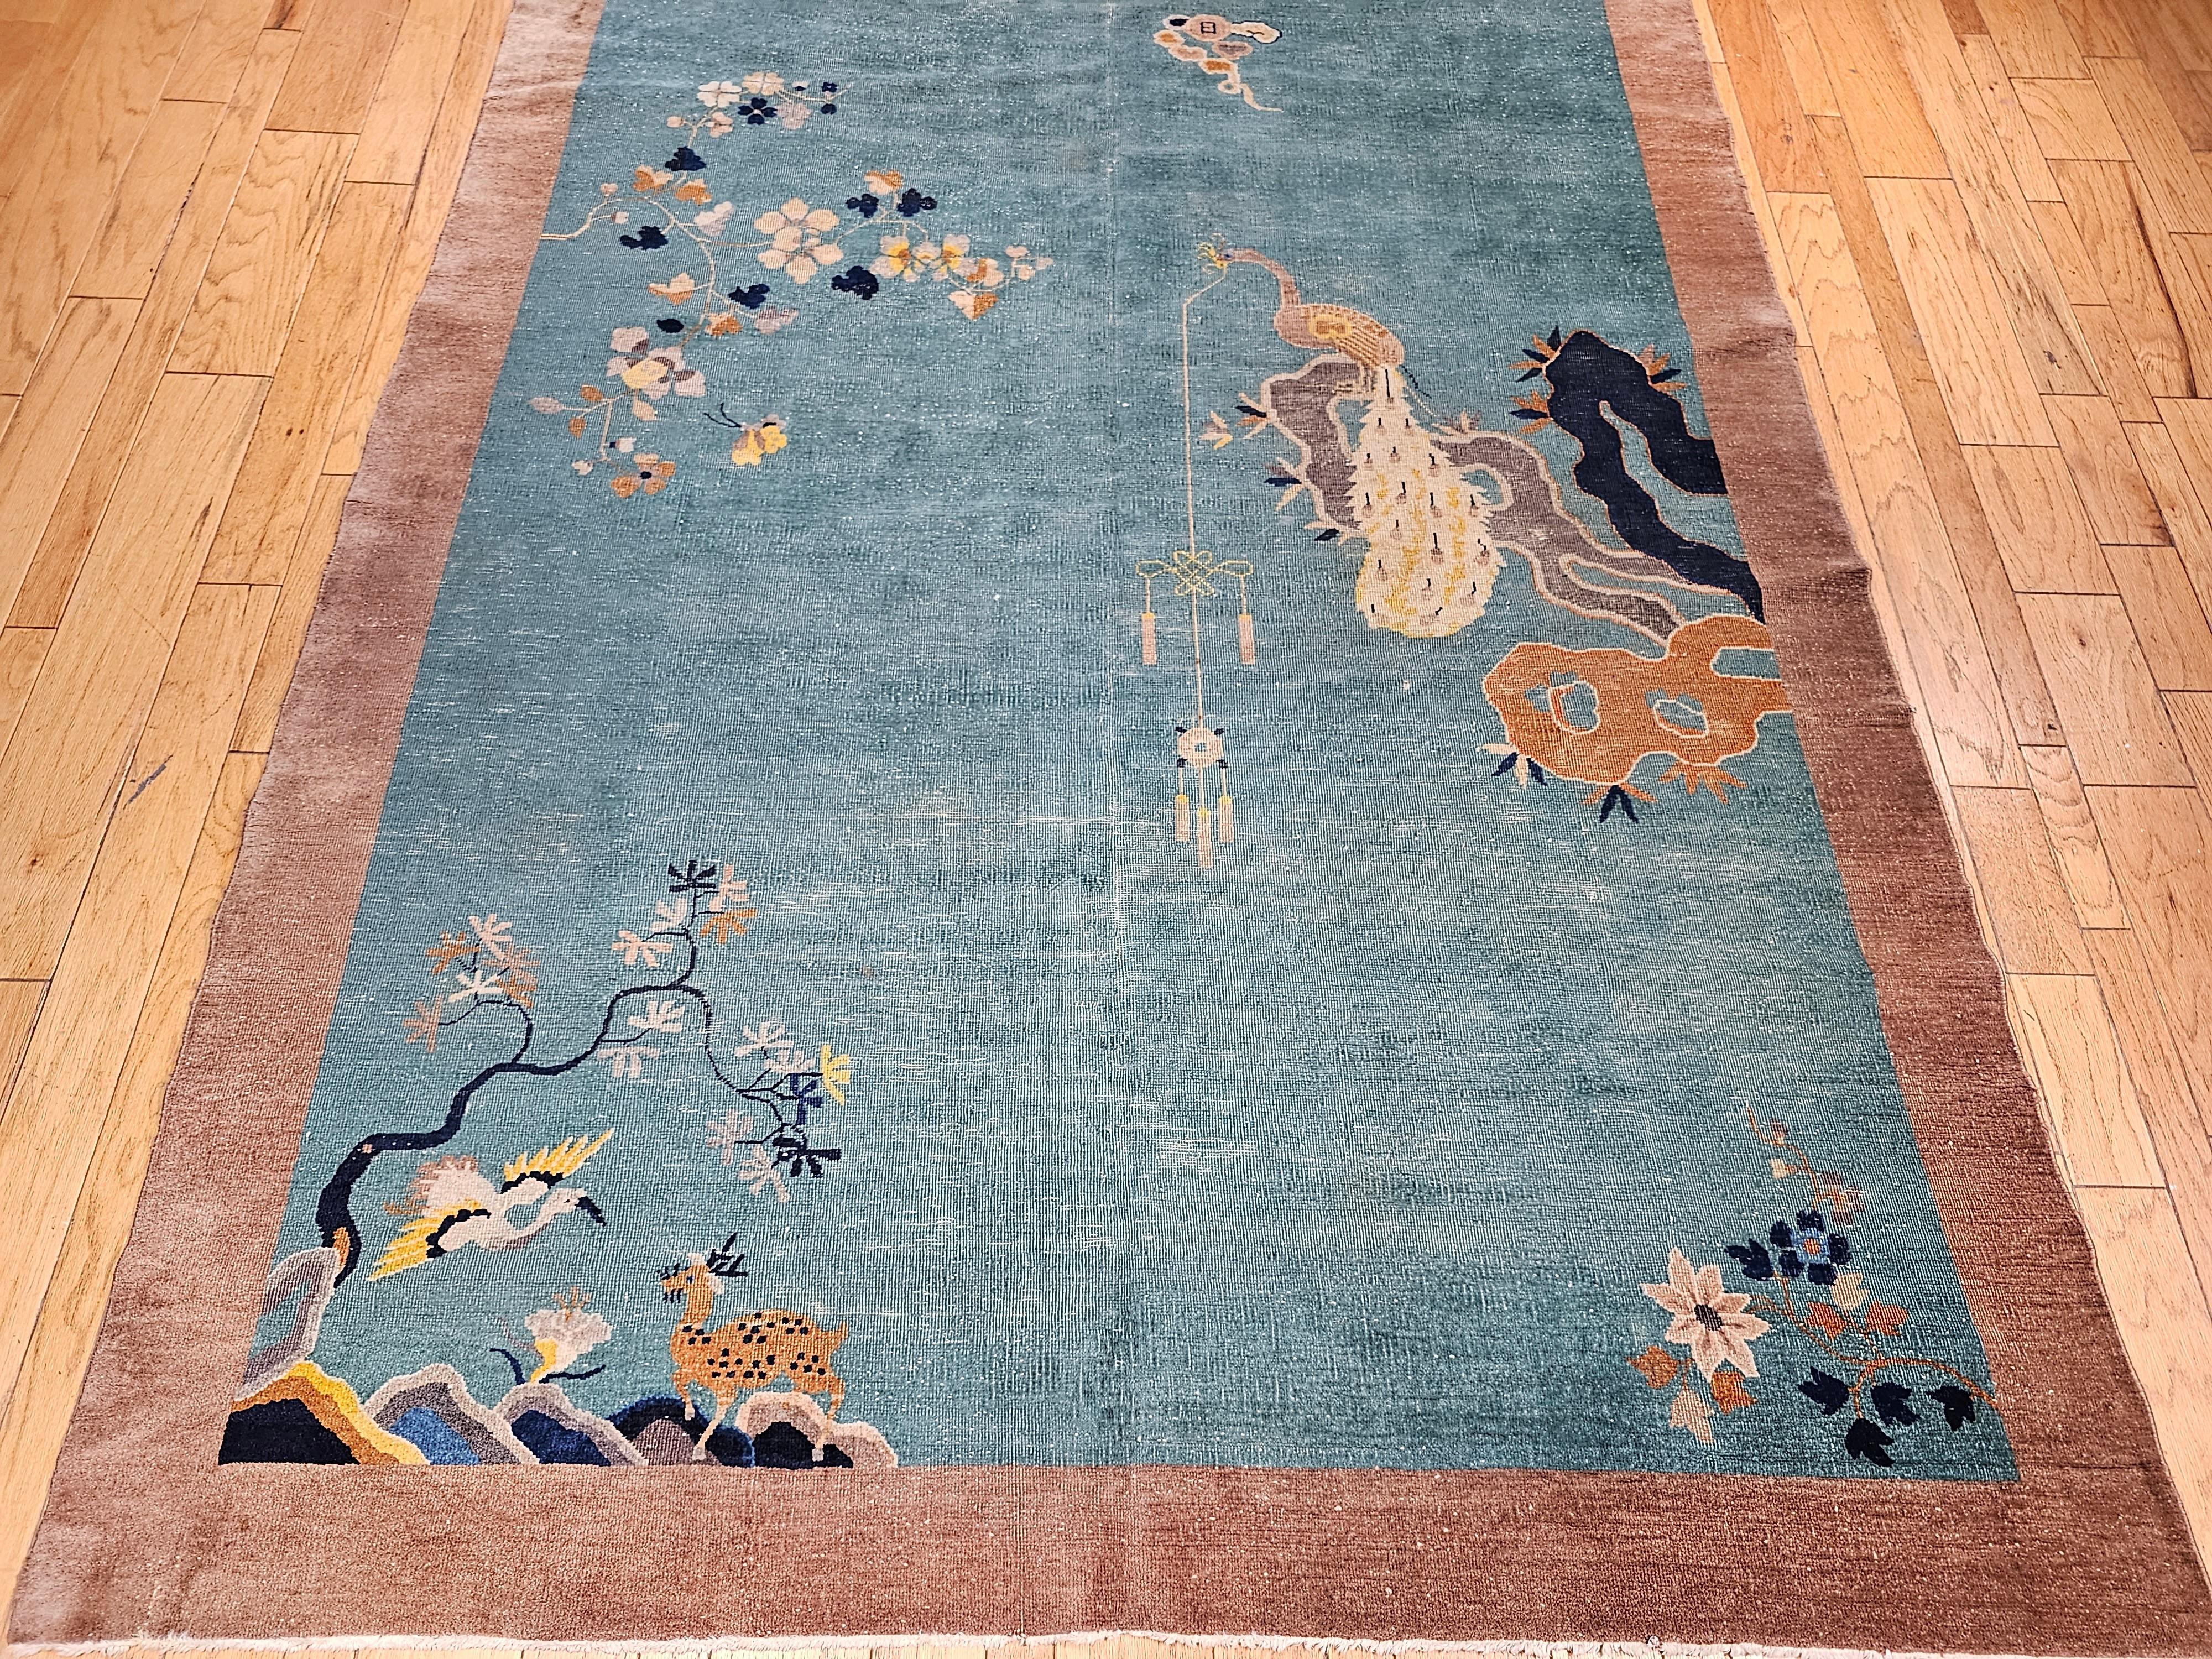 A beautiful hand-knotted Chinese Art Deco rug with birds and flower designs from the early 1900s.  This rug has a beautiful pale tea/green field color with lush floral design perfusing throughout the field in gray, blue, red, yellow, and cream